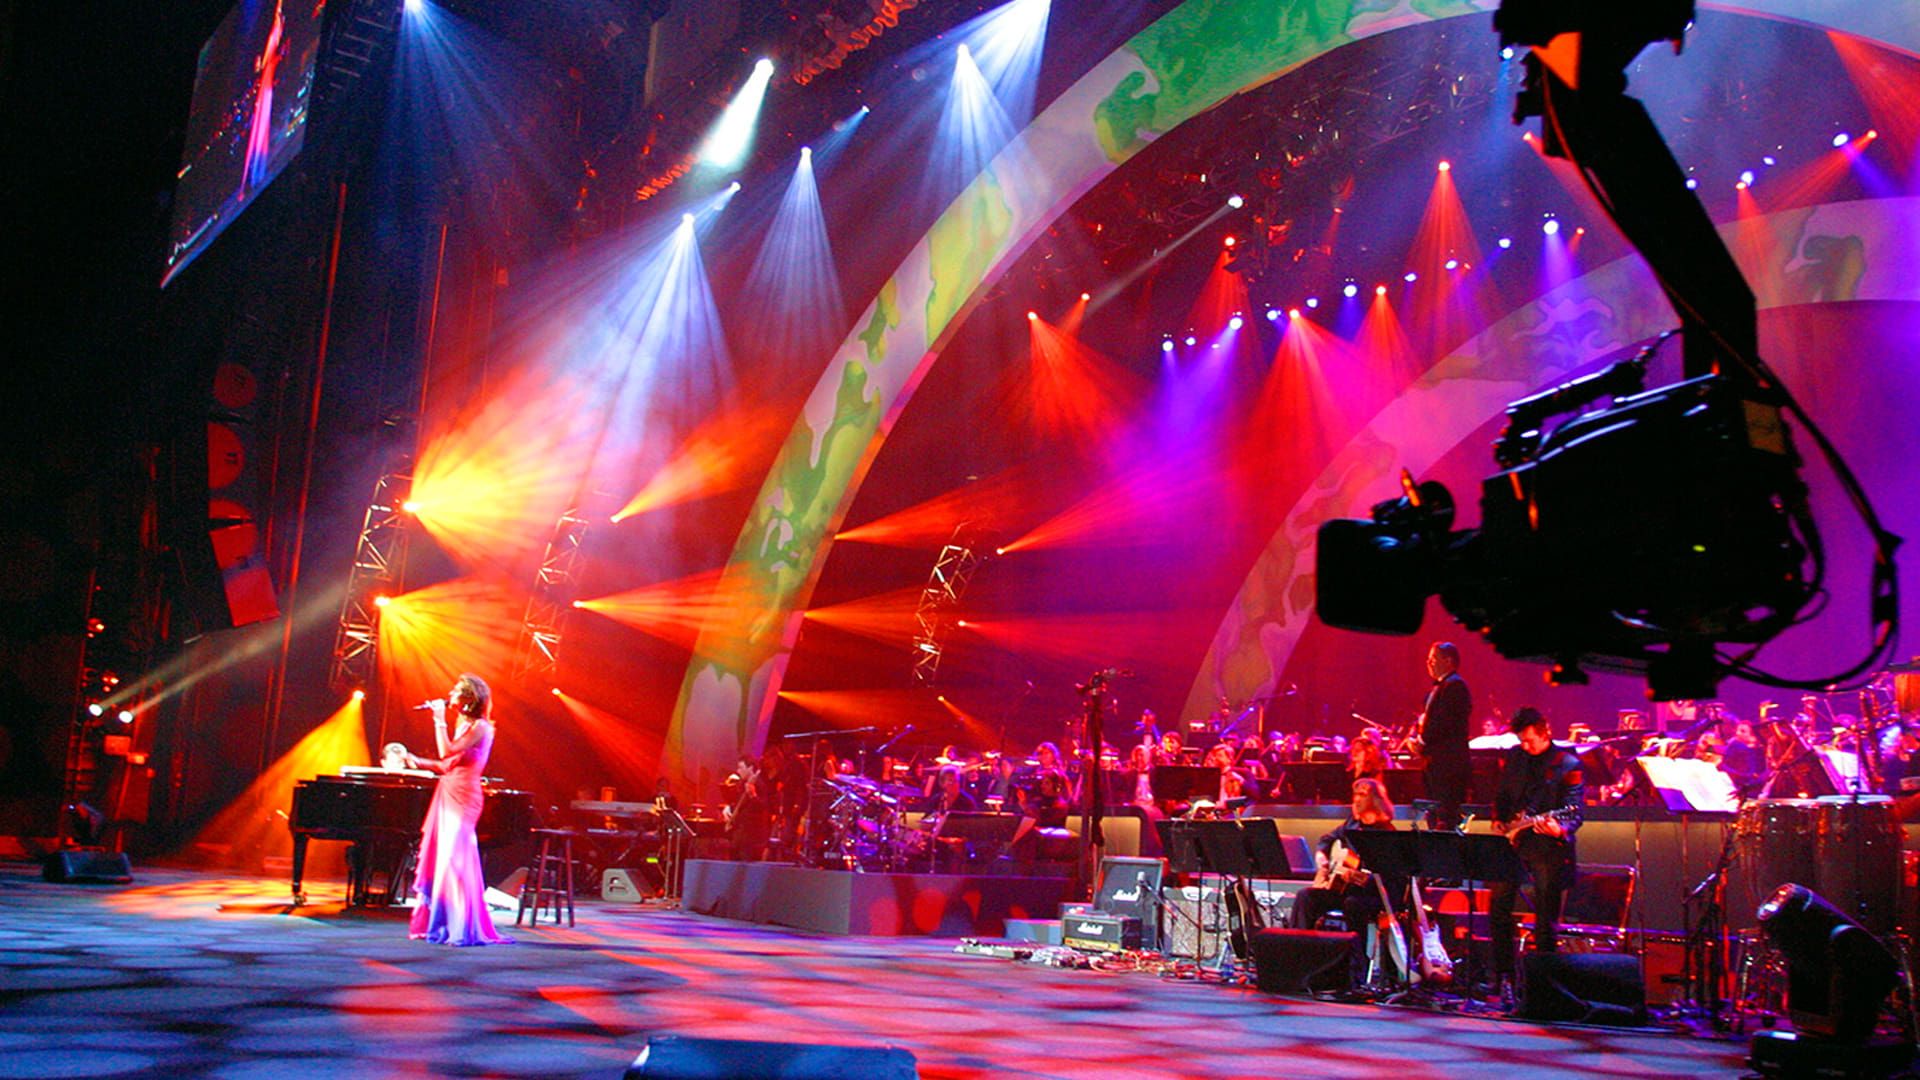 The Concert for World Children's Day background